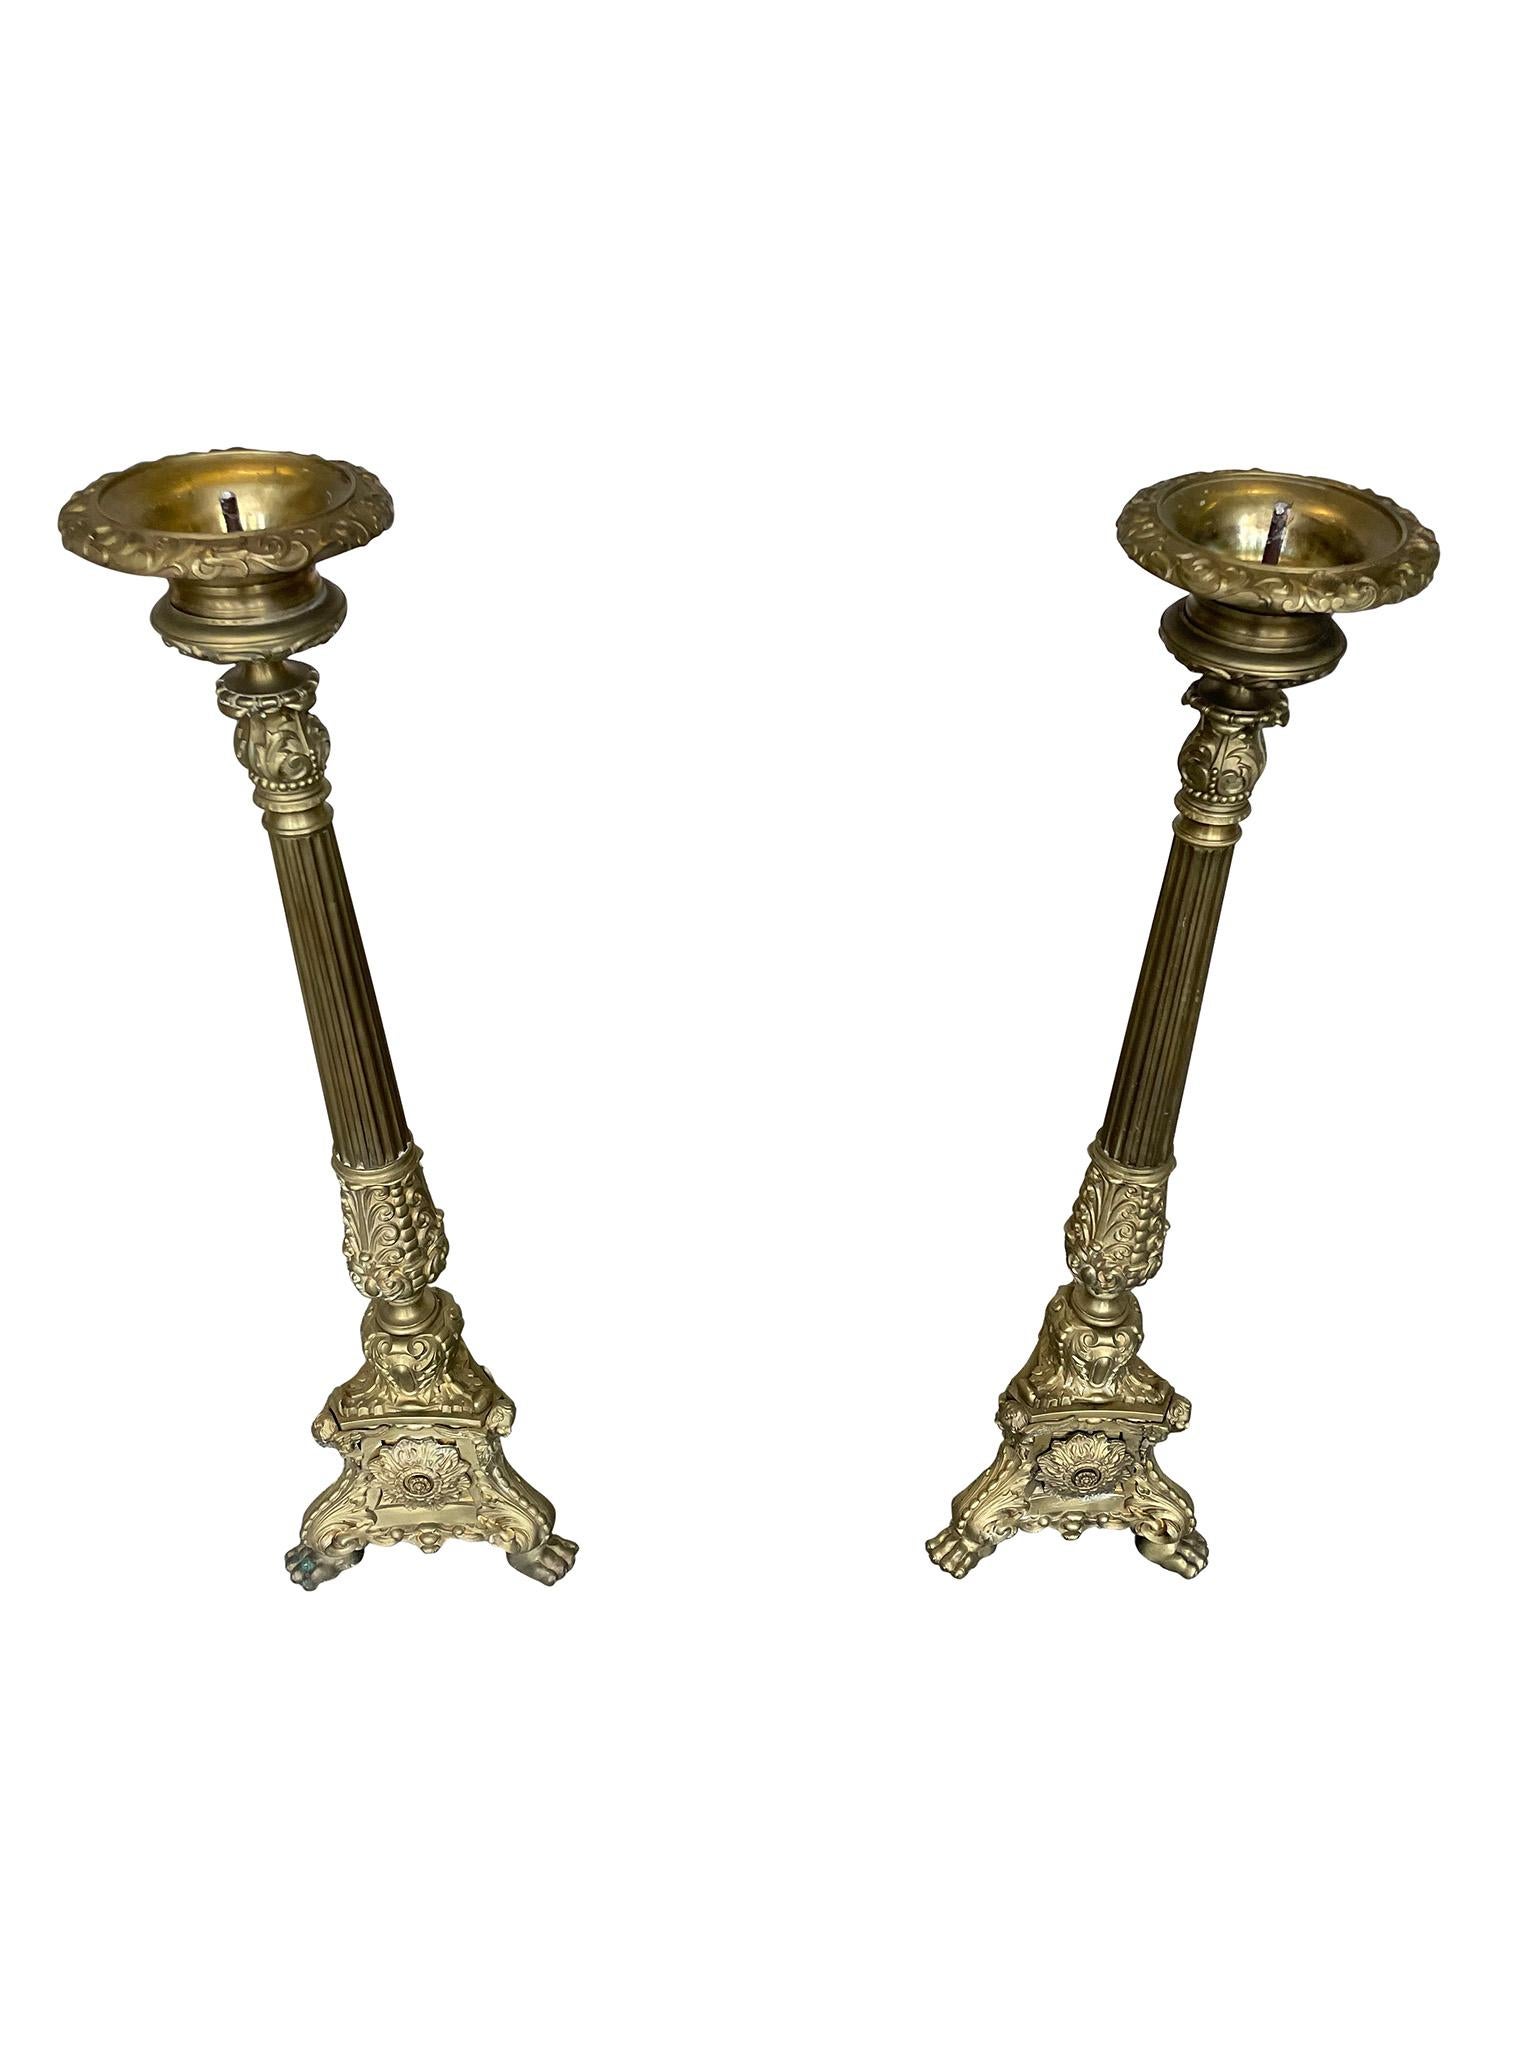 Lovely pair of large brass Altar Candlesticks. Adorned with classical embellishments, a pair of winged cherubs at the base, and on paw feet. Perfect for an added touch of drama and elegance to any living space. Fully functional. 

Dimensions:
10